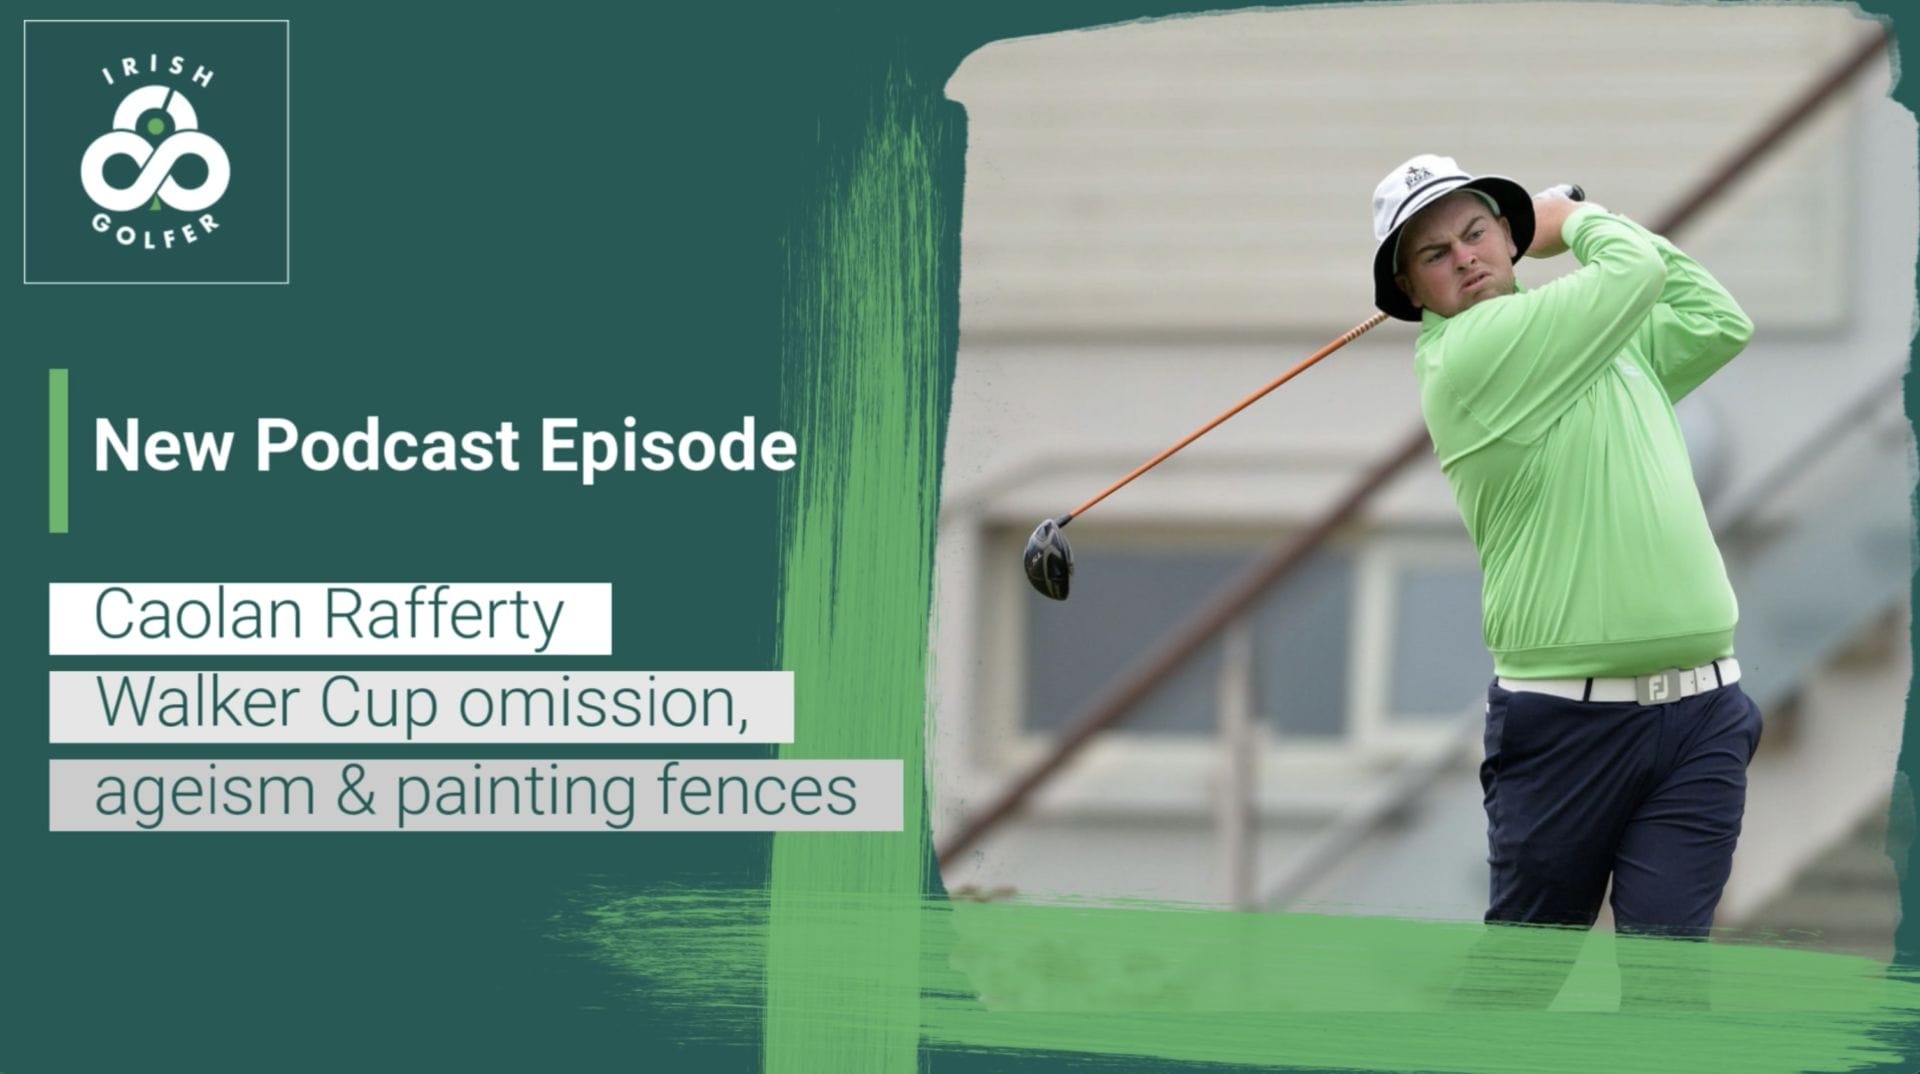 Podcast: Caolan Rafferty – Walker Cup omission, ageism & painting fences